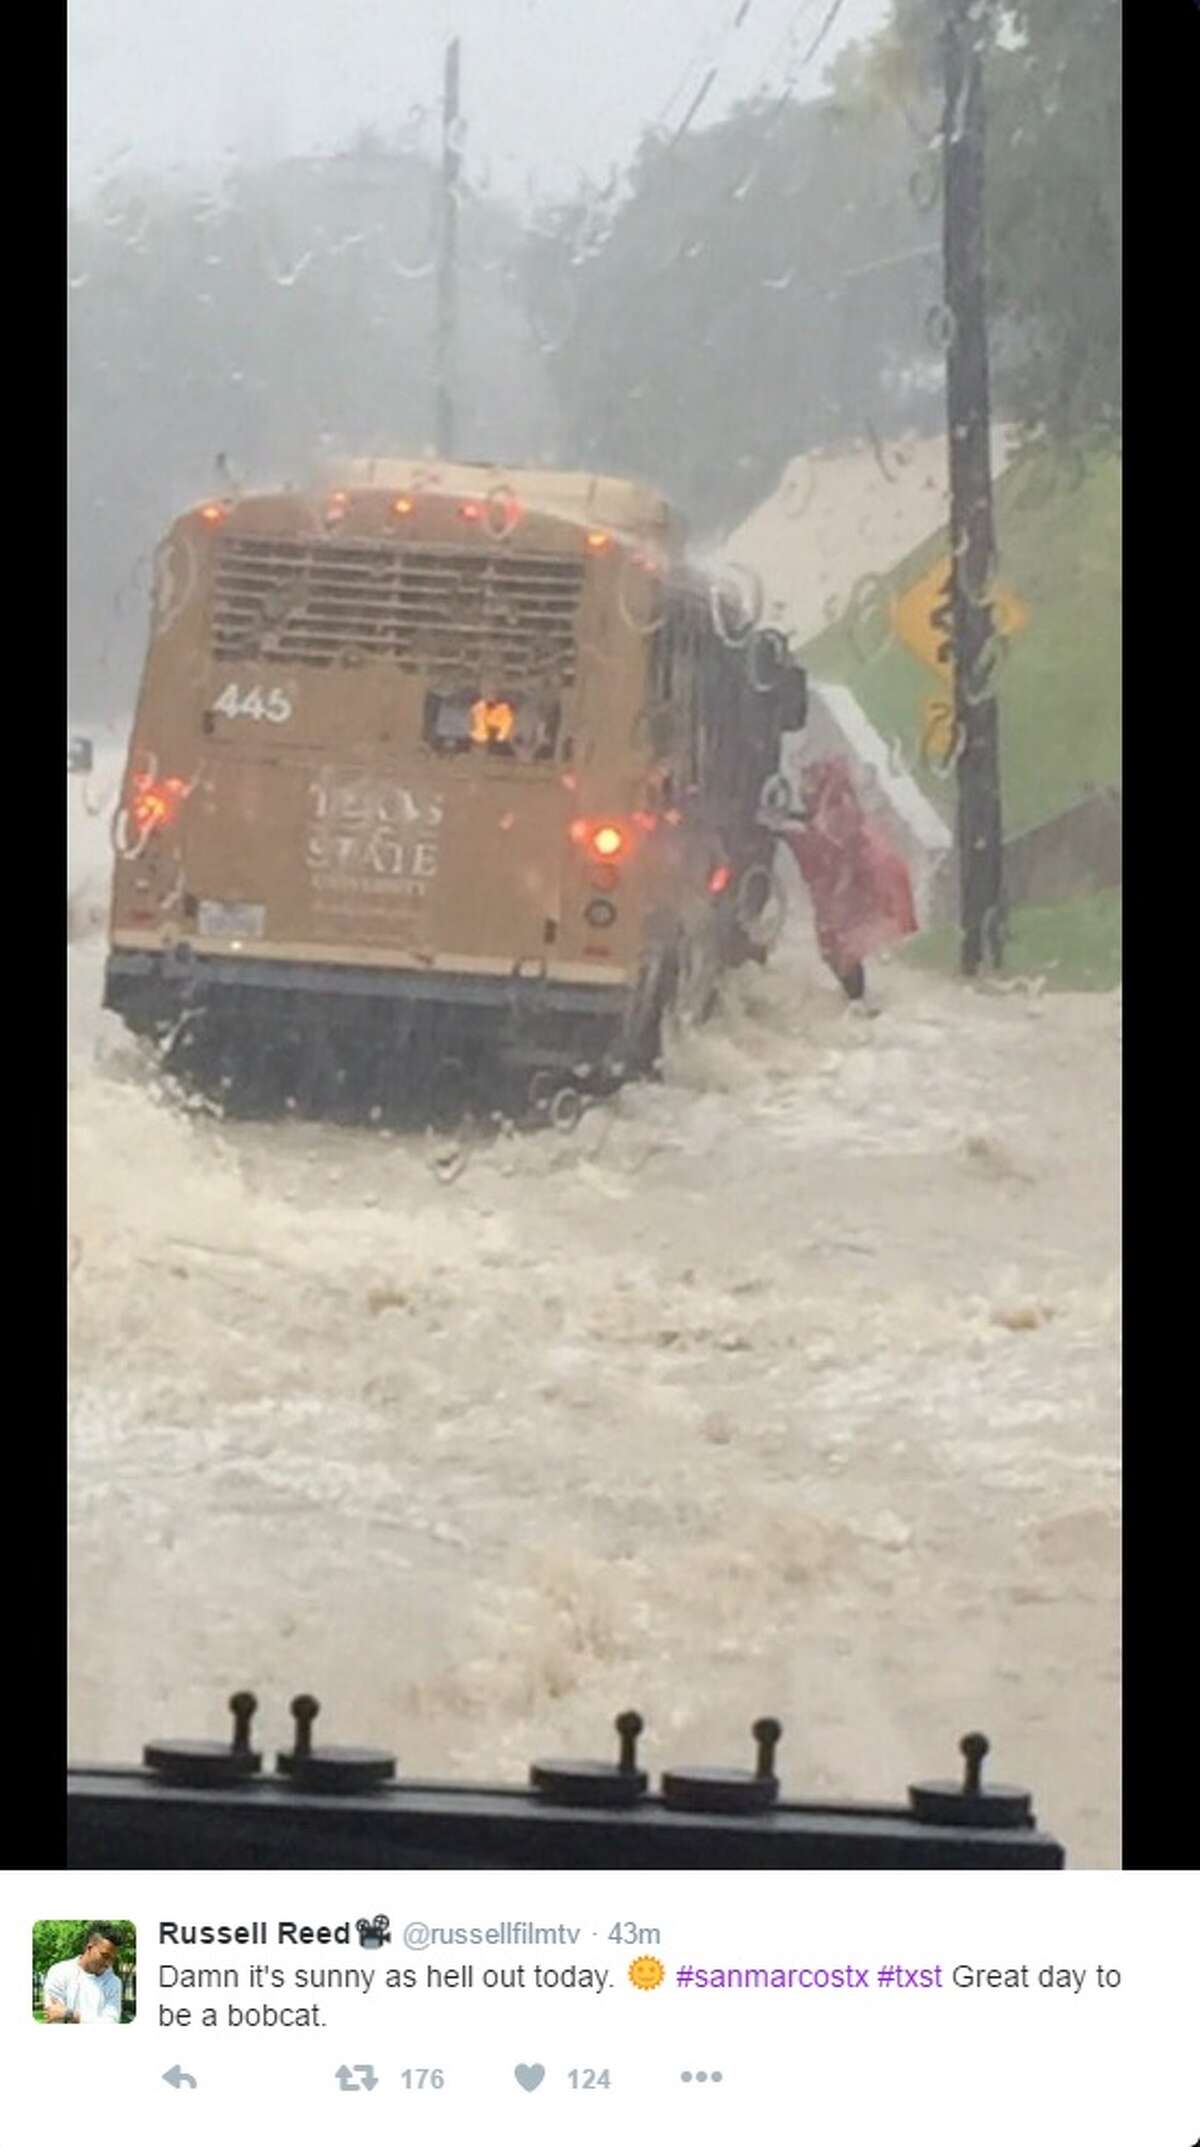 Texas State University and Hays County experienced heavy rain Sept. 26, 2016. Many students at the university took to Twitter to share photos and express frustration with Texas State.